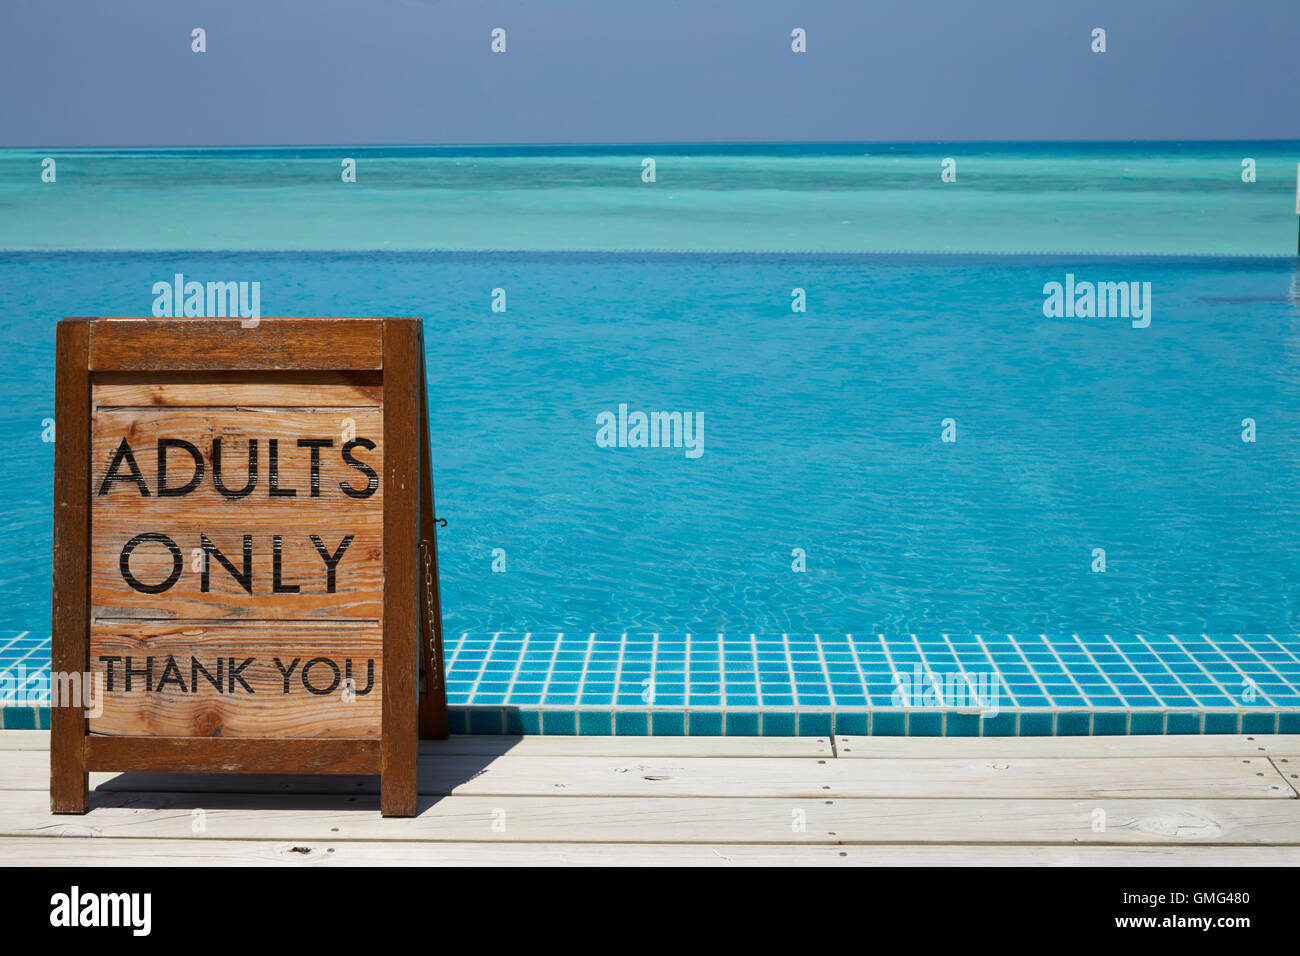 Adults only sign by an infinity pool with ocean beyond Stock Photo